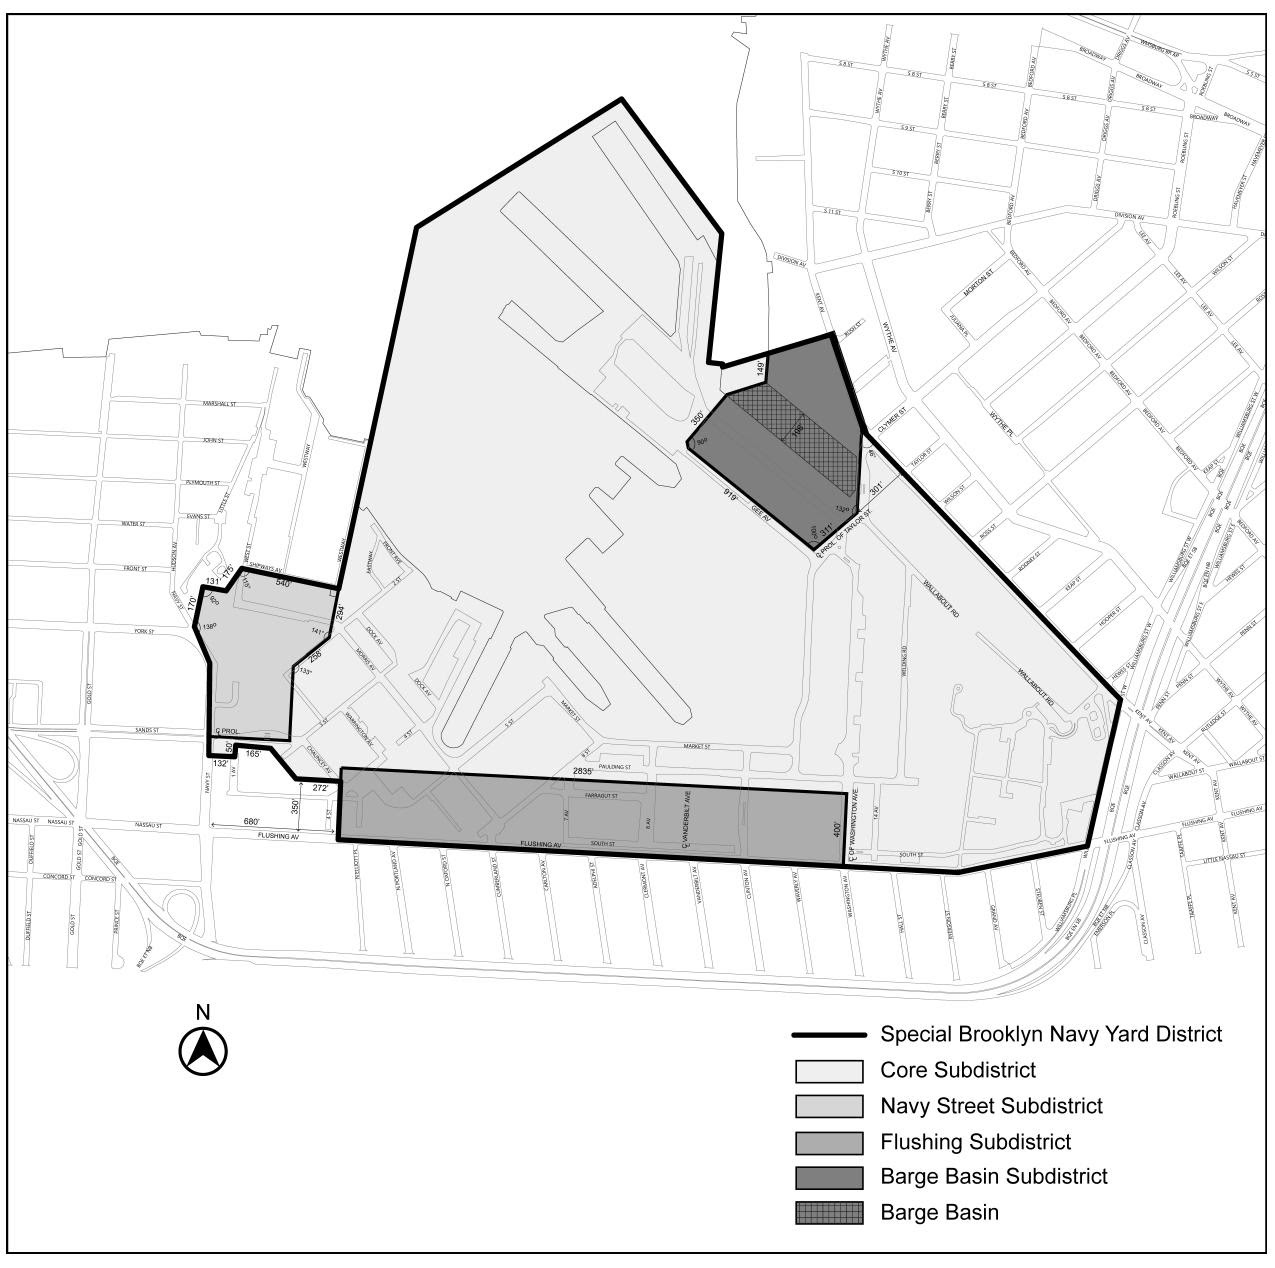 Zoning Resolutions Chapter 4: Special Brooklyn Navy Yard District APPENDIX A.0